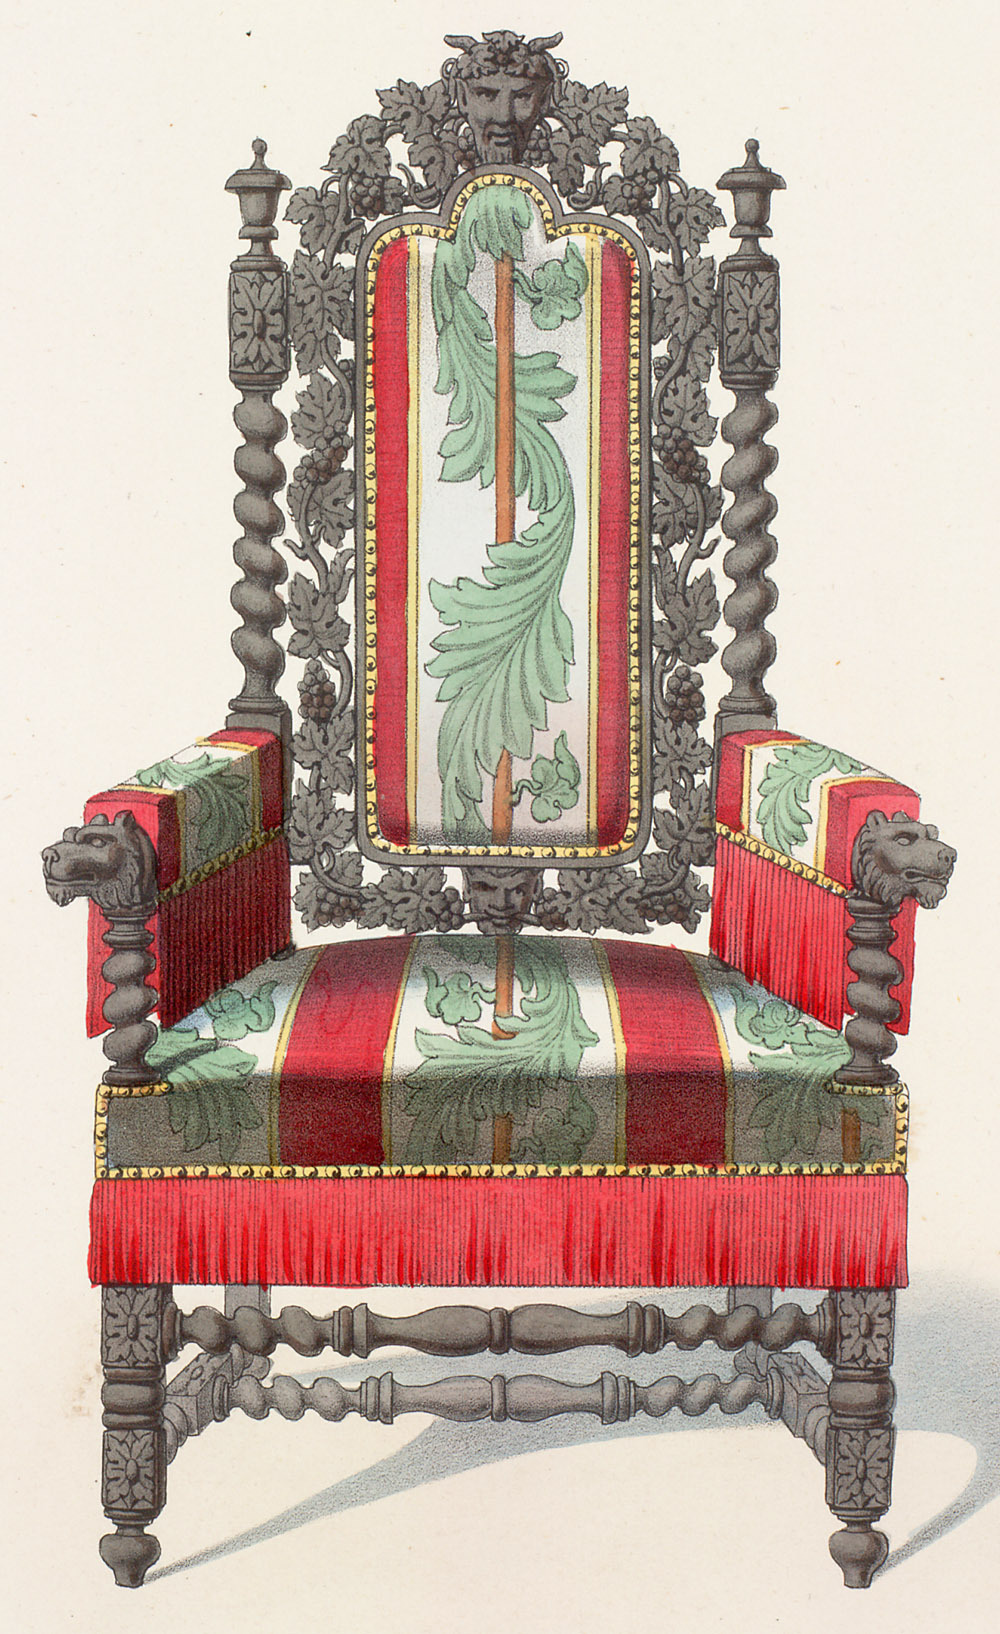 Turning The Book Wheel Armchair In The Renaissance Revival Style